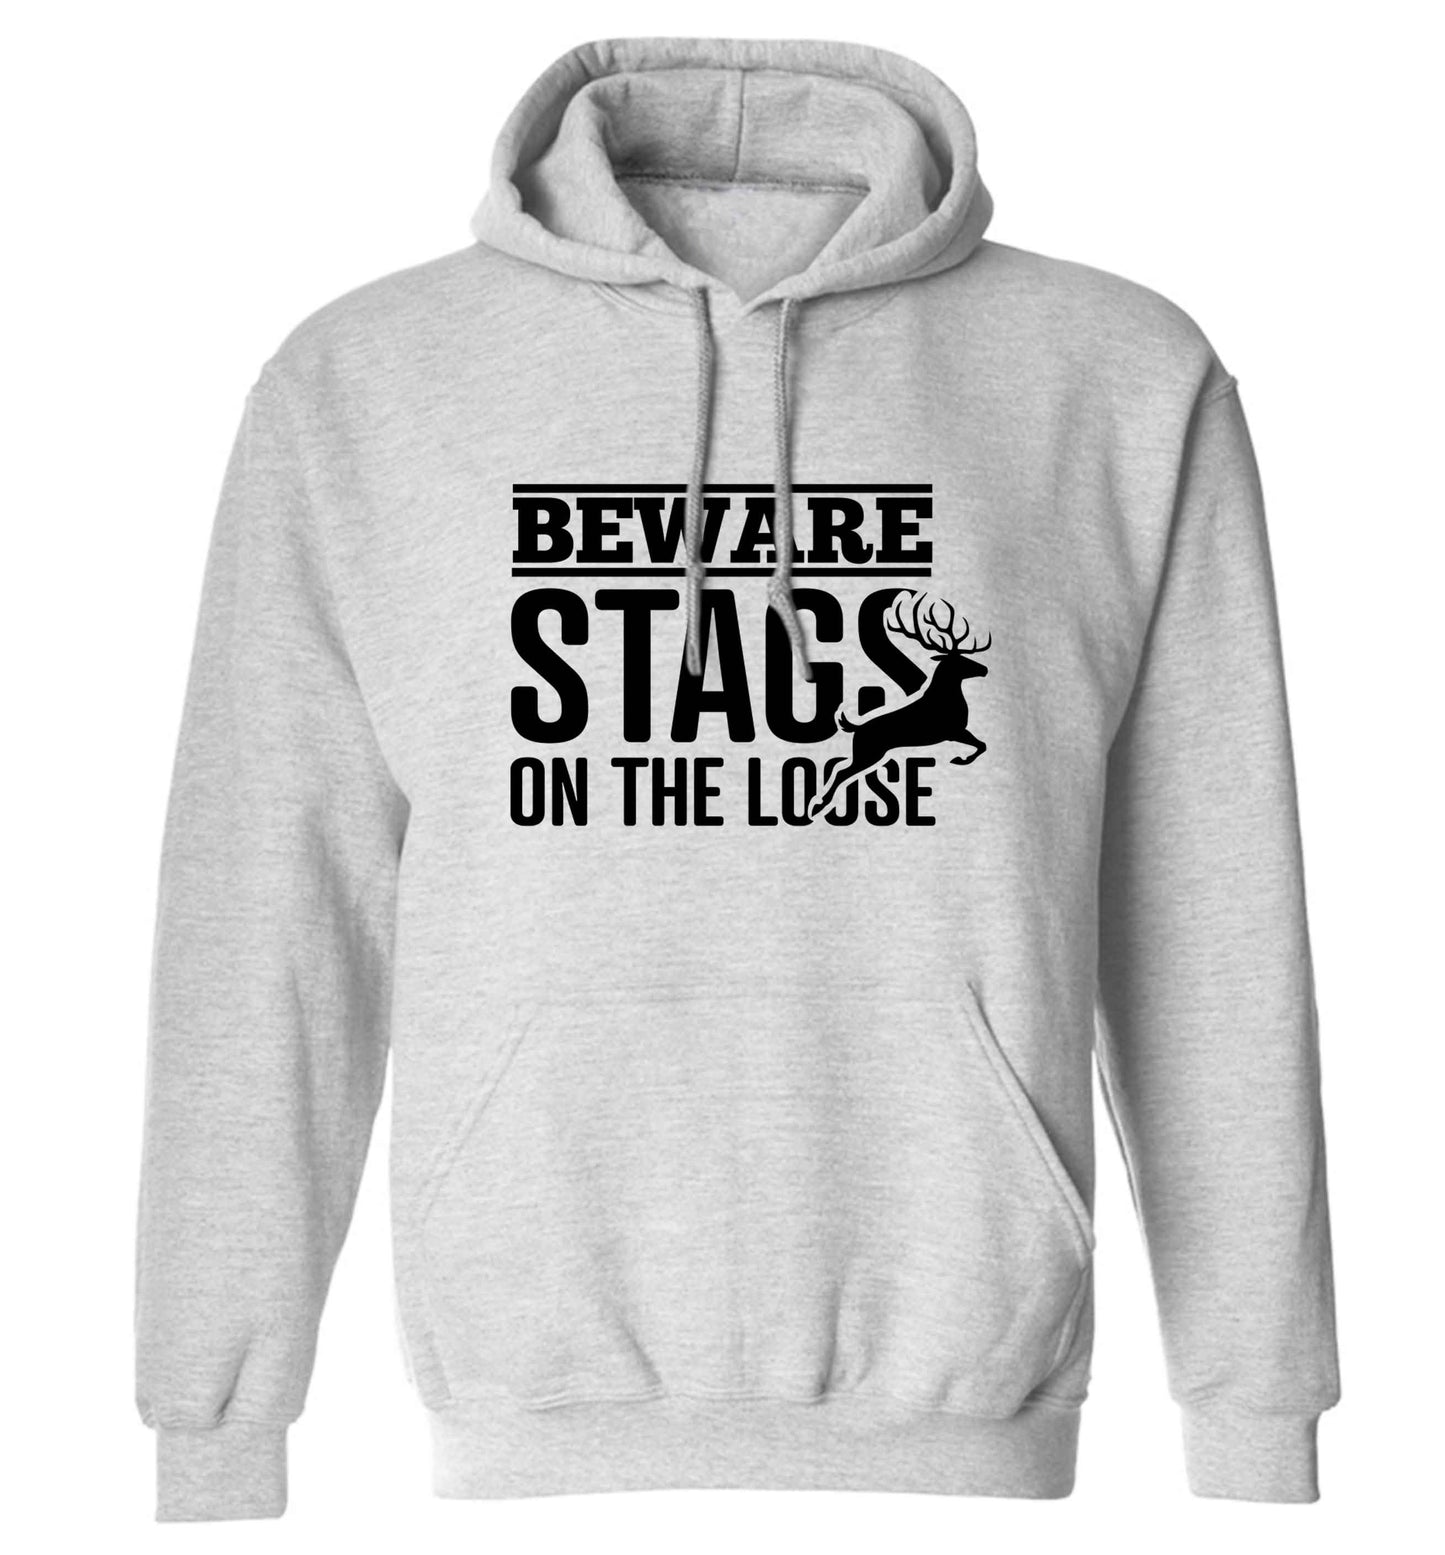 Beware stags on the loose adults unisex grey hoodie 2XL